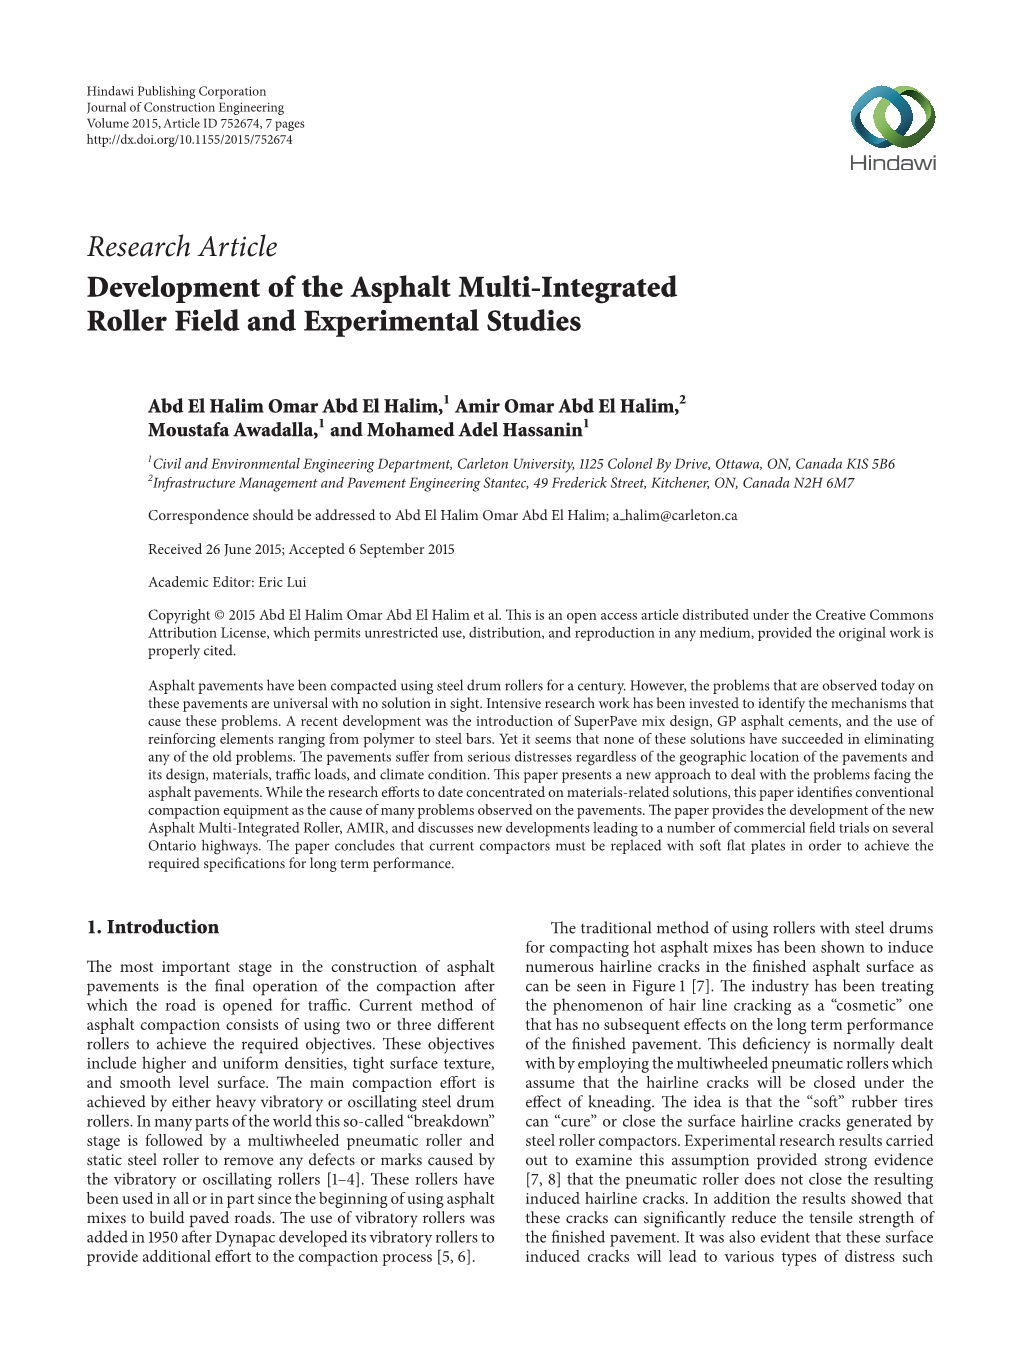 Research Article Development of the Asphalt Multi-Integrated Roller Field and Experimental Studies